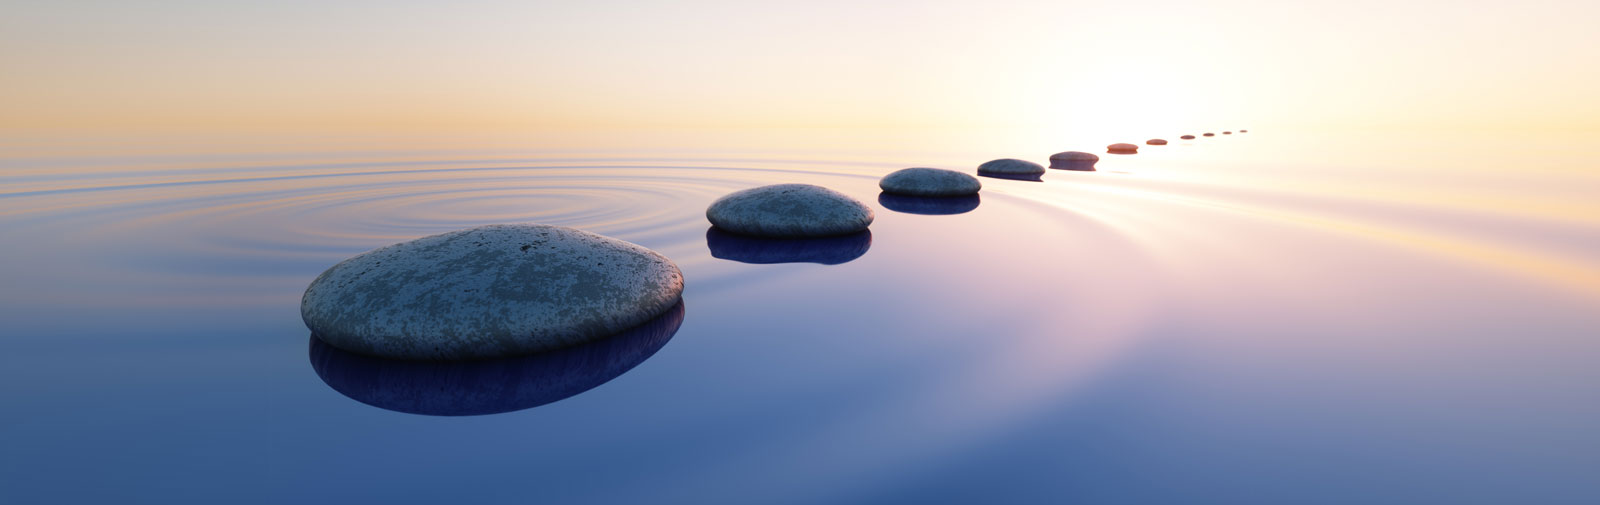 Stones set as a path through water with bright light reflecting off the water.